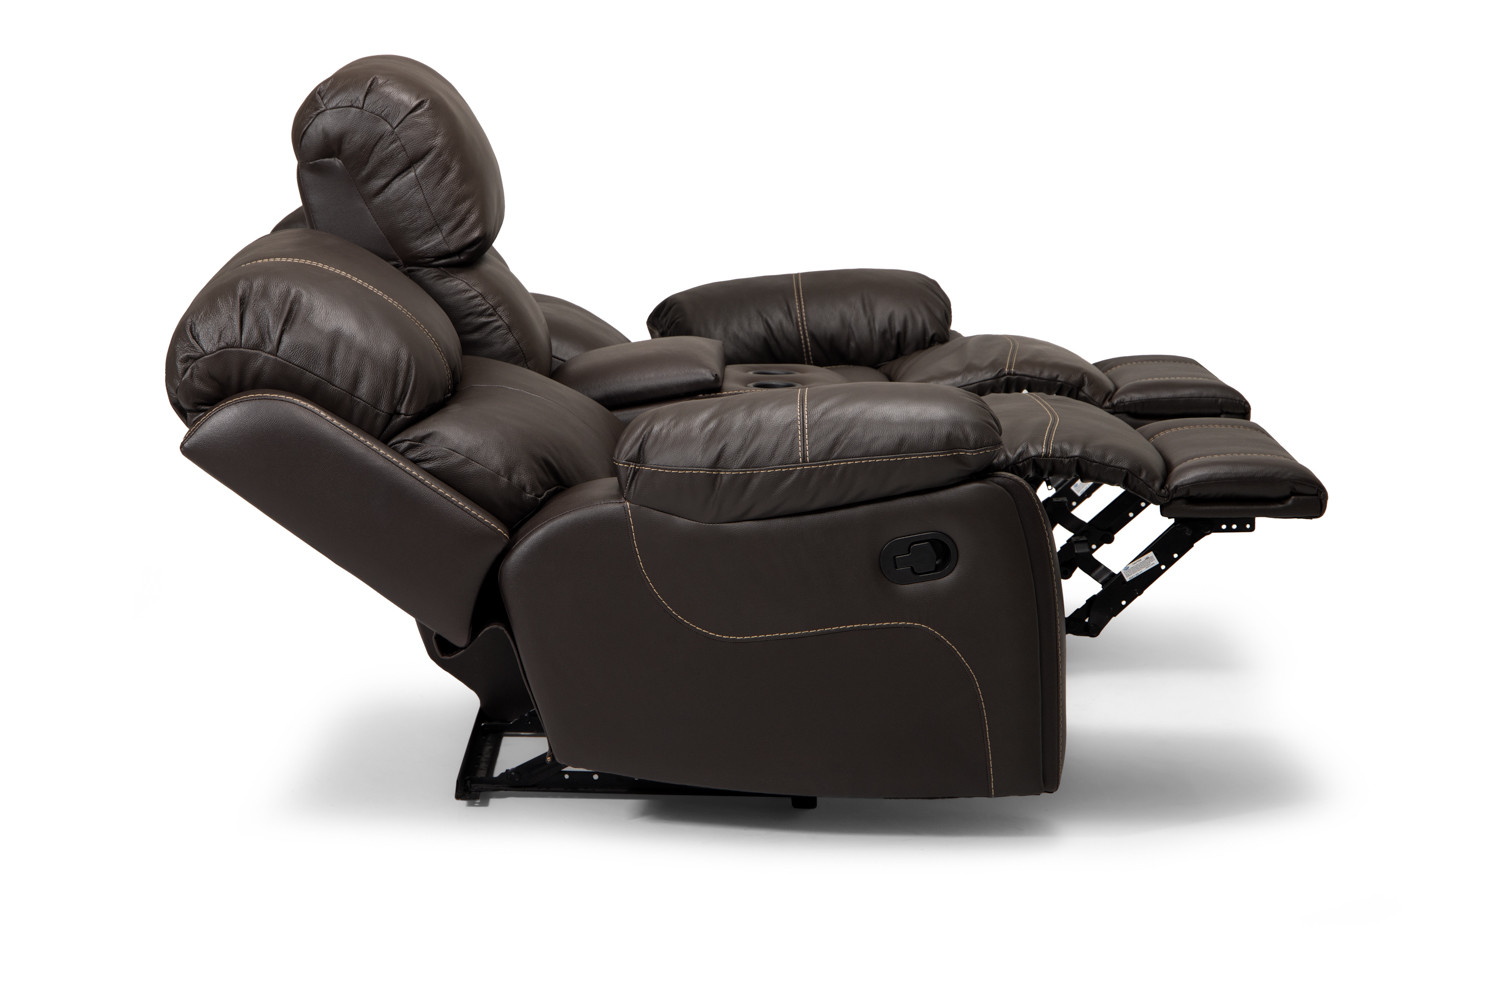 Halton 2 Seater Cinema Recliner - Mocca 2 Seater Recliners - 8